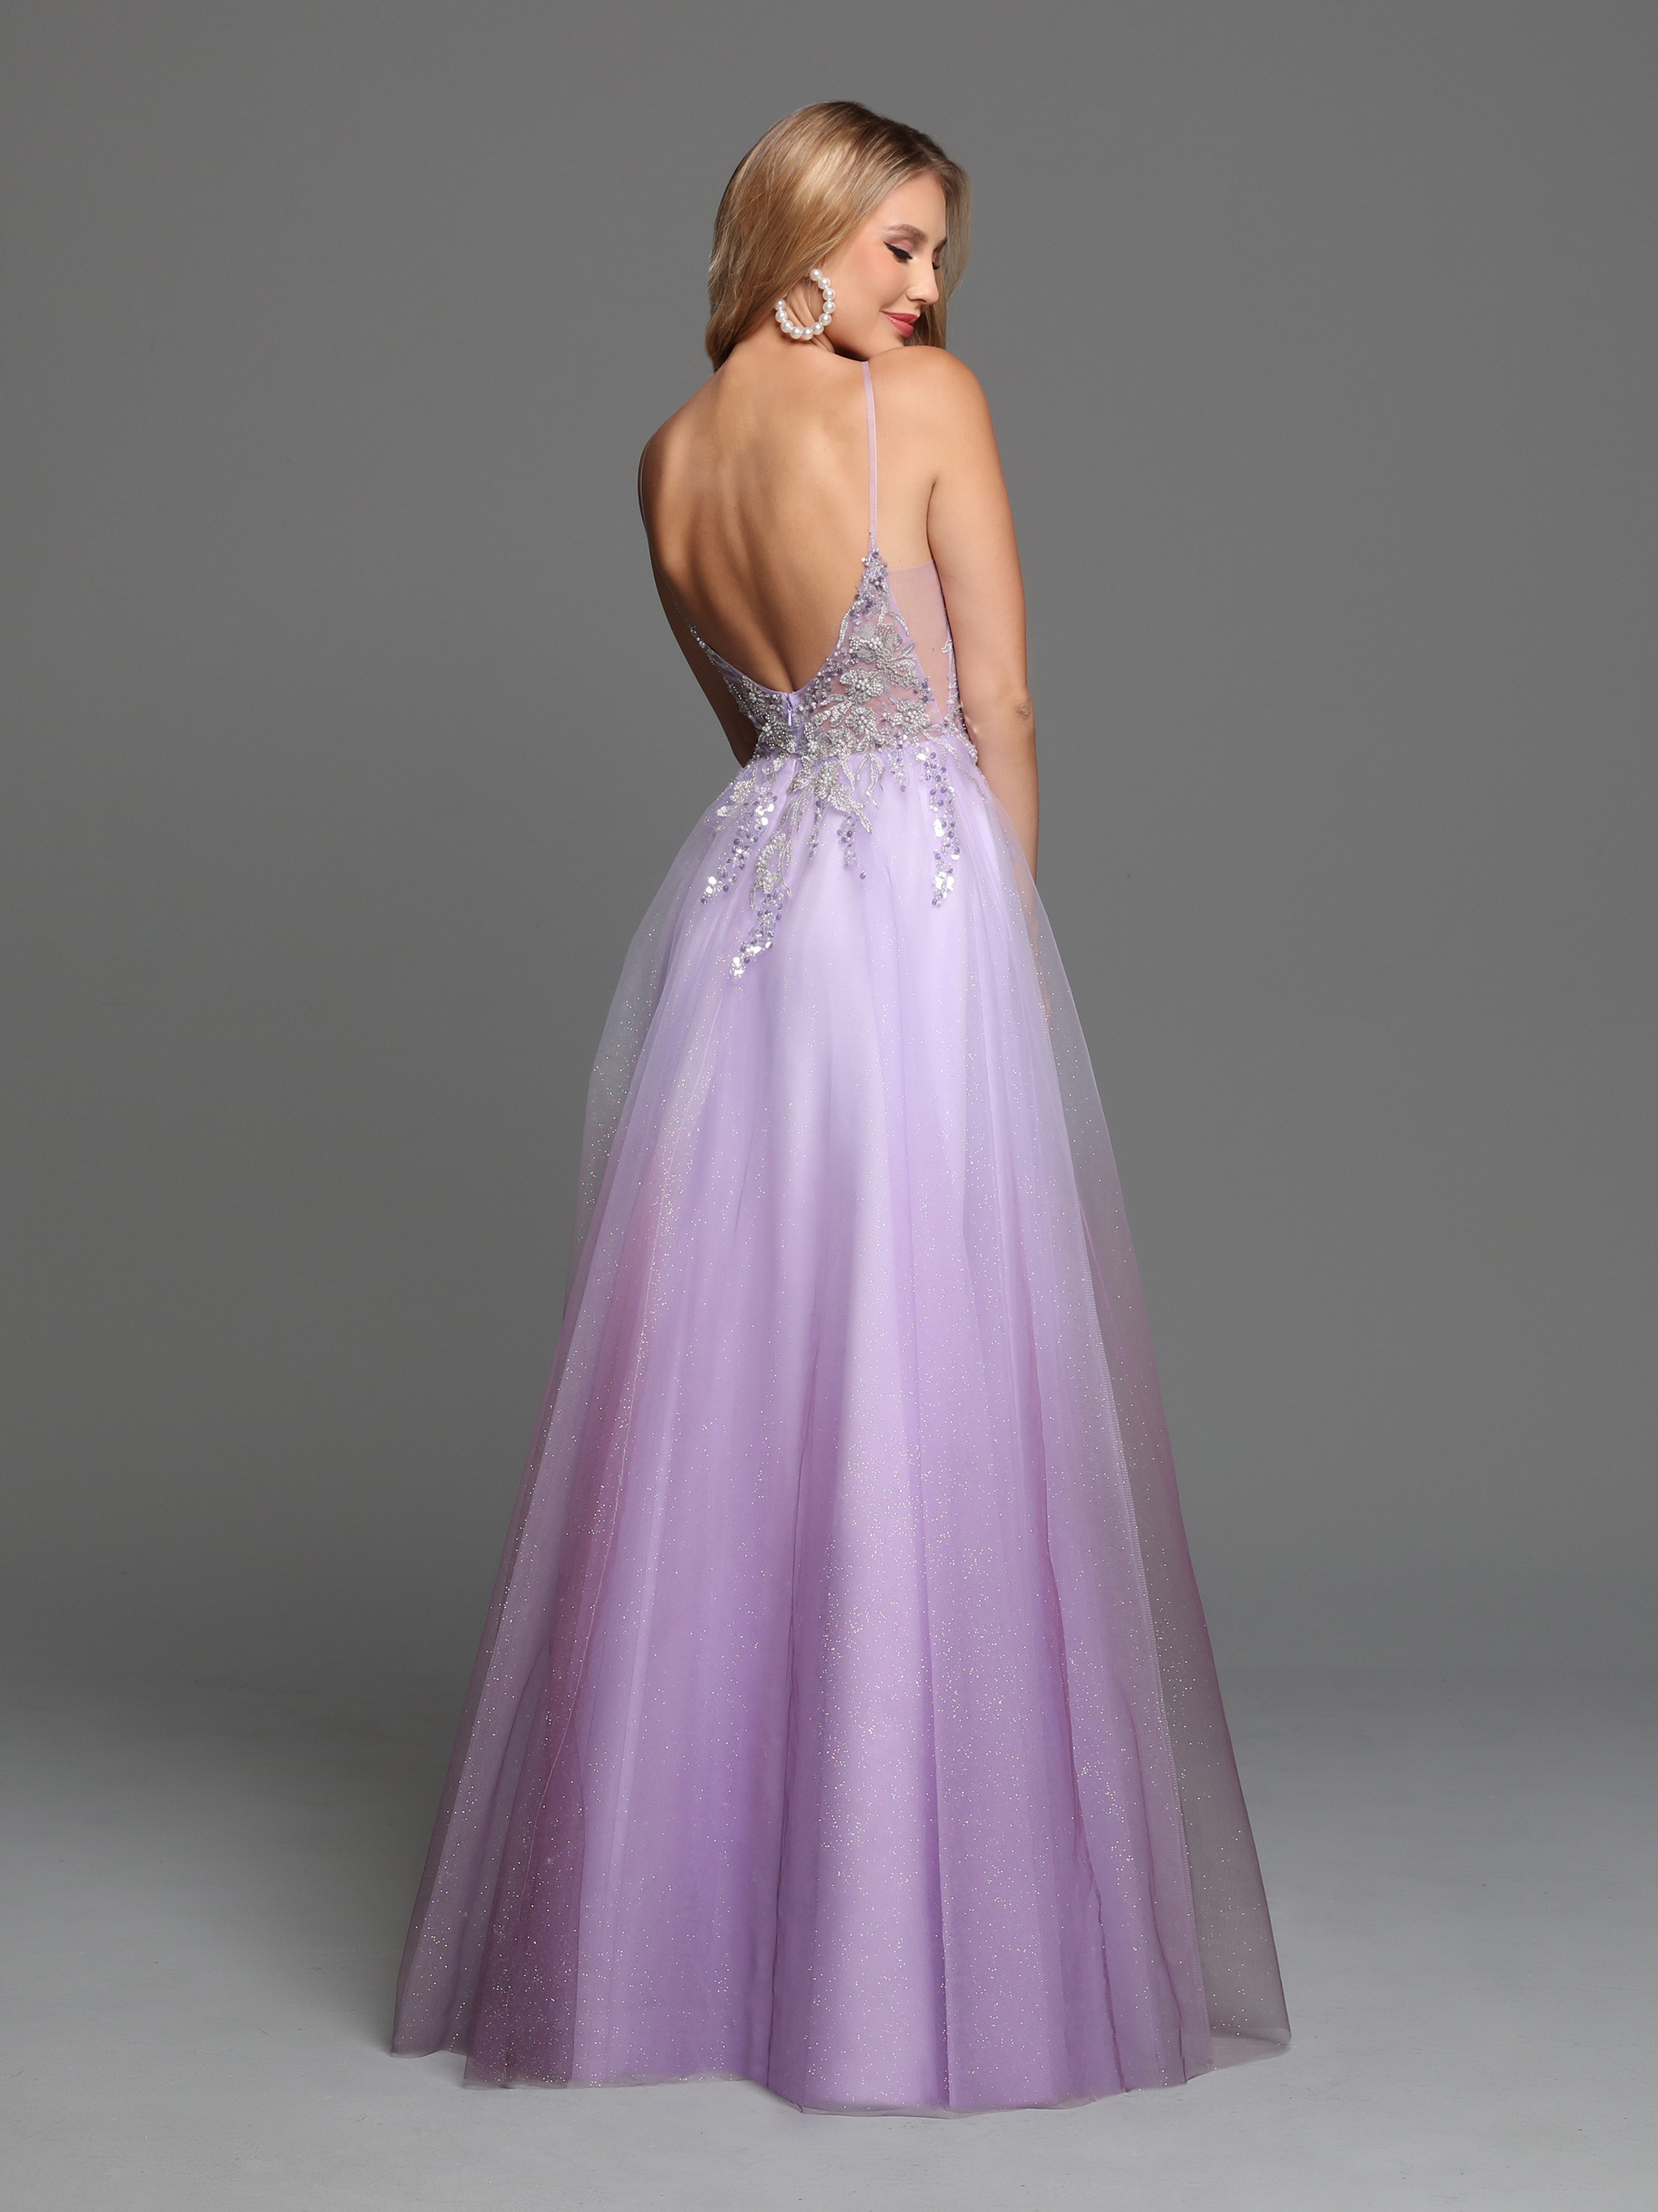 Image showing back view of style #72286